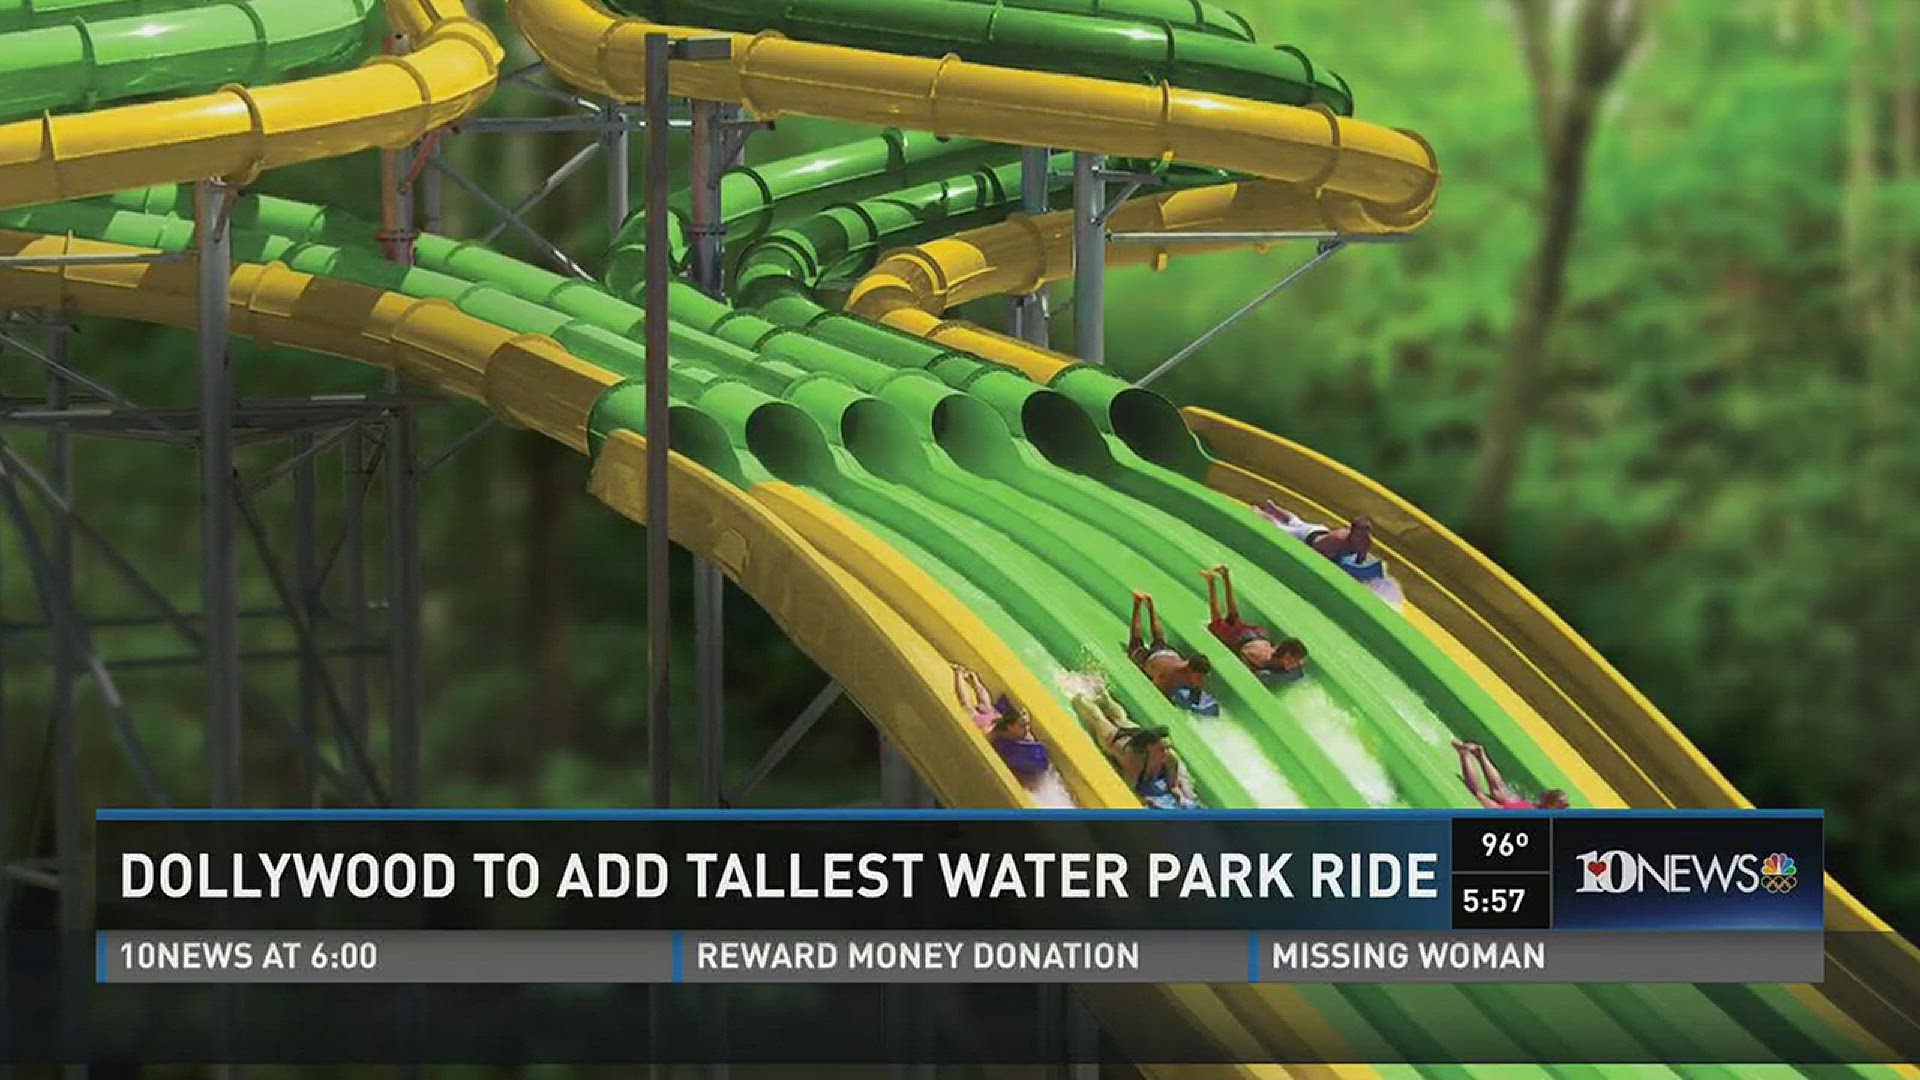 A five-story tall waterslide longer than a football field called the Tailspin Racer will open in 2017.